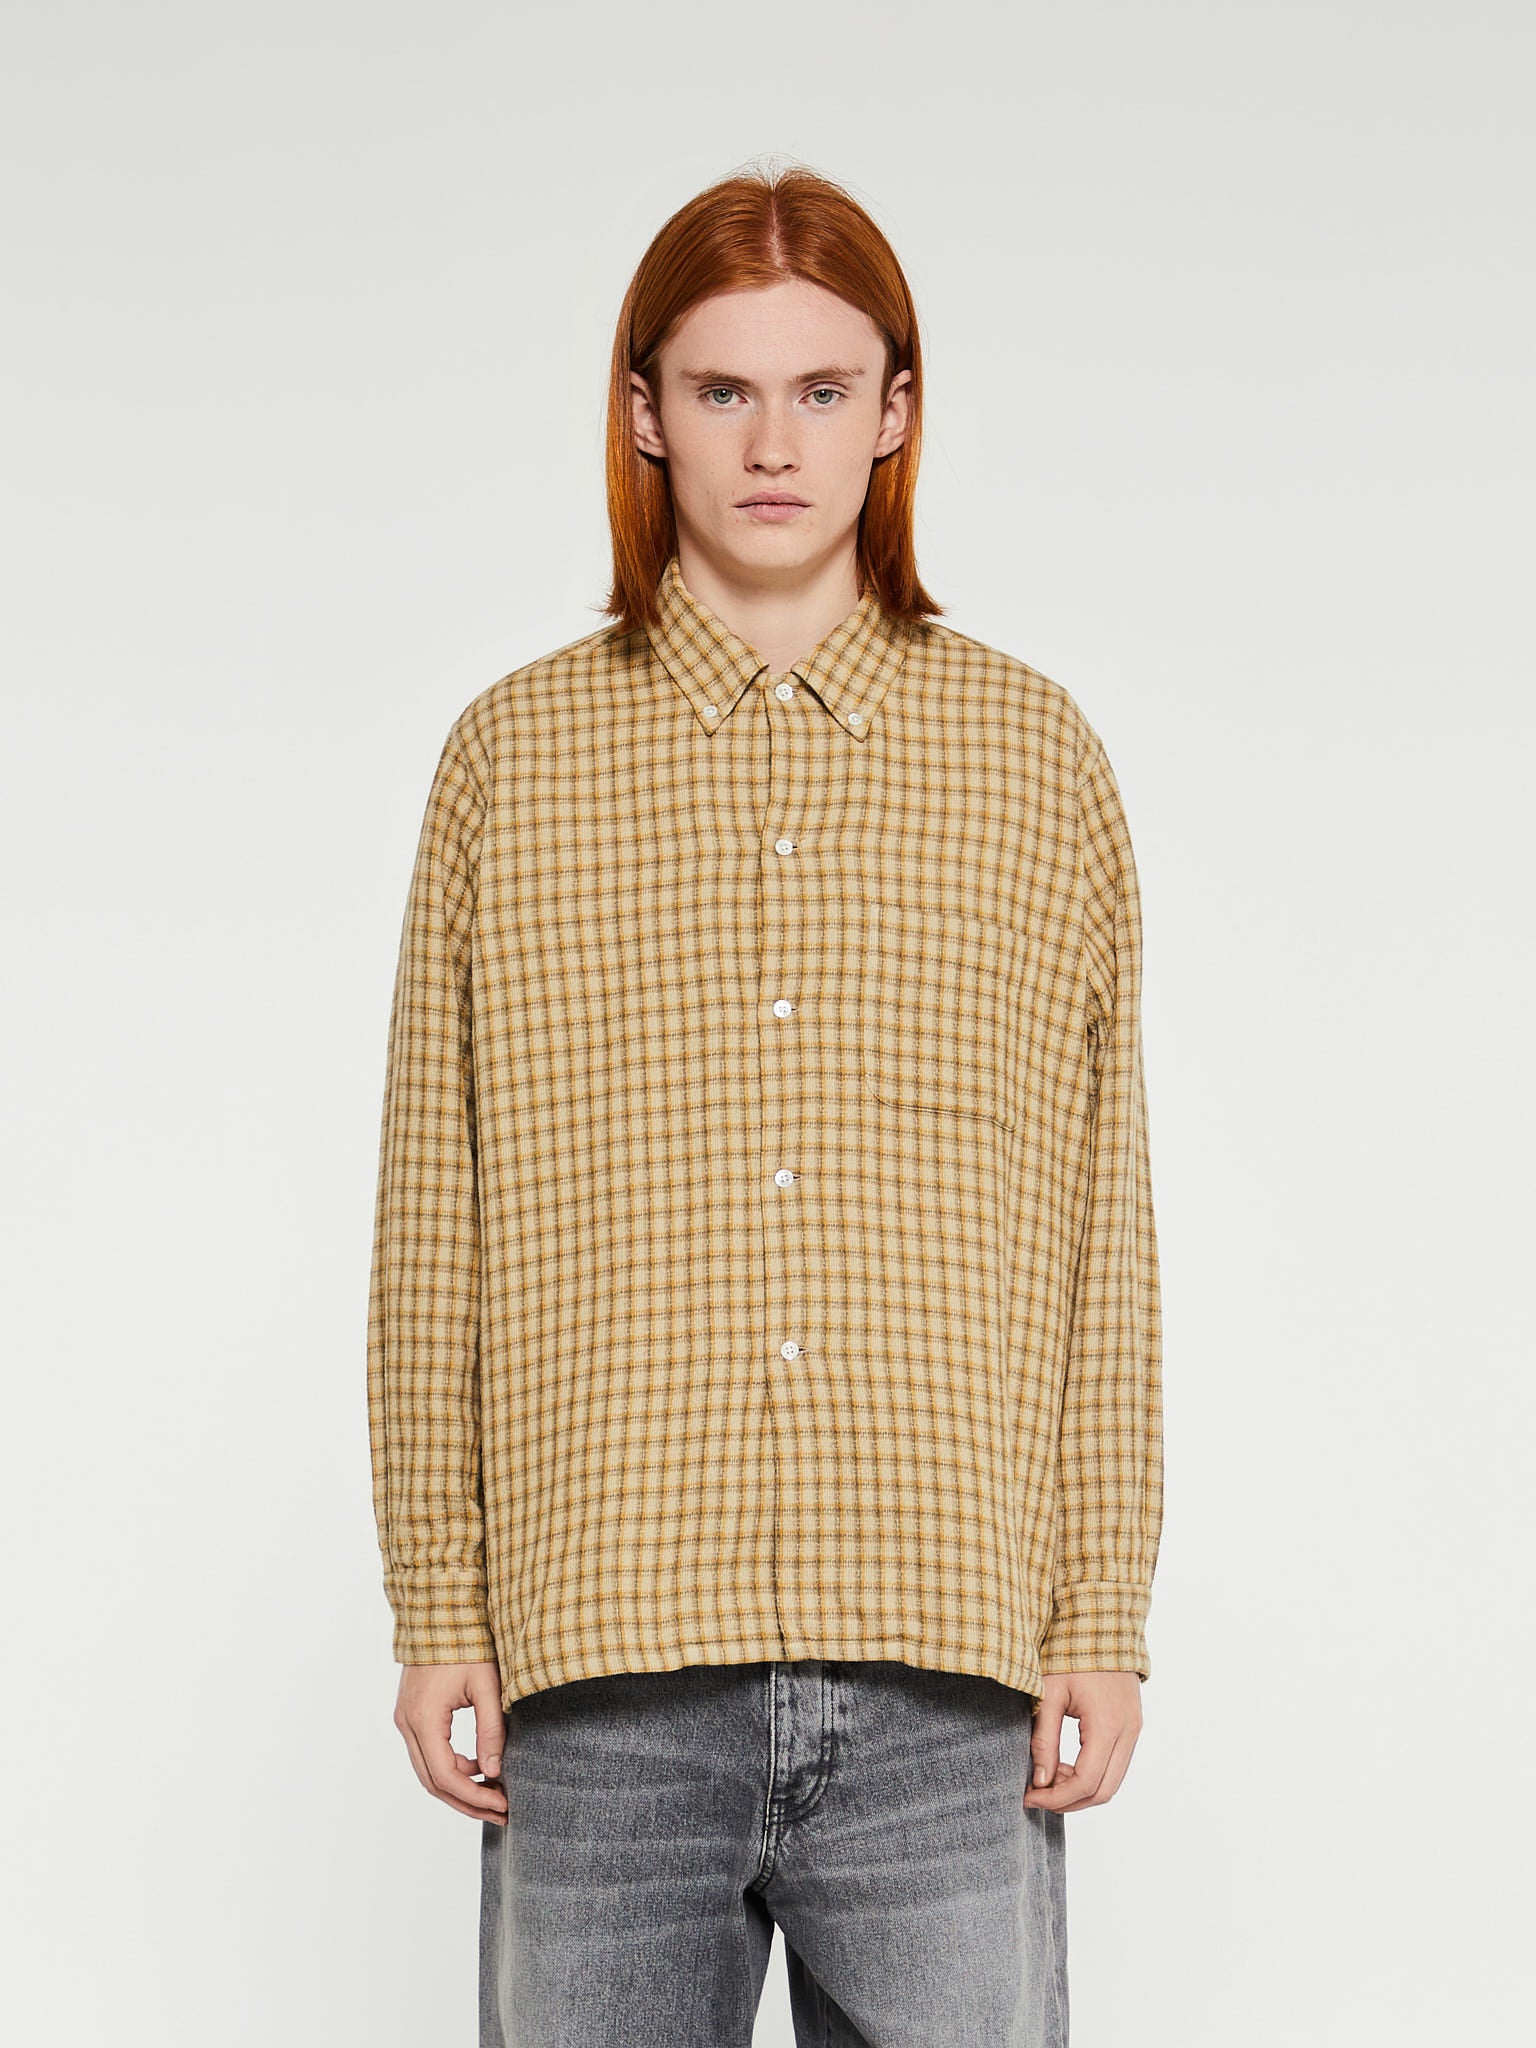 Beams Plus - Open B.D. Panama Check Double Face Shirt in Beige